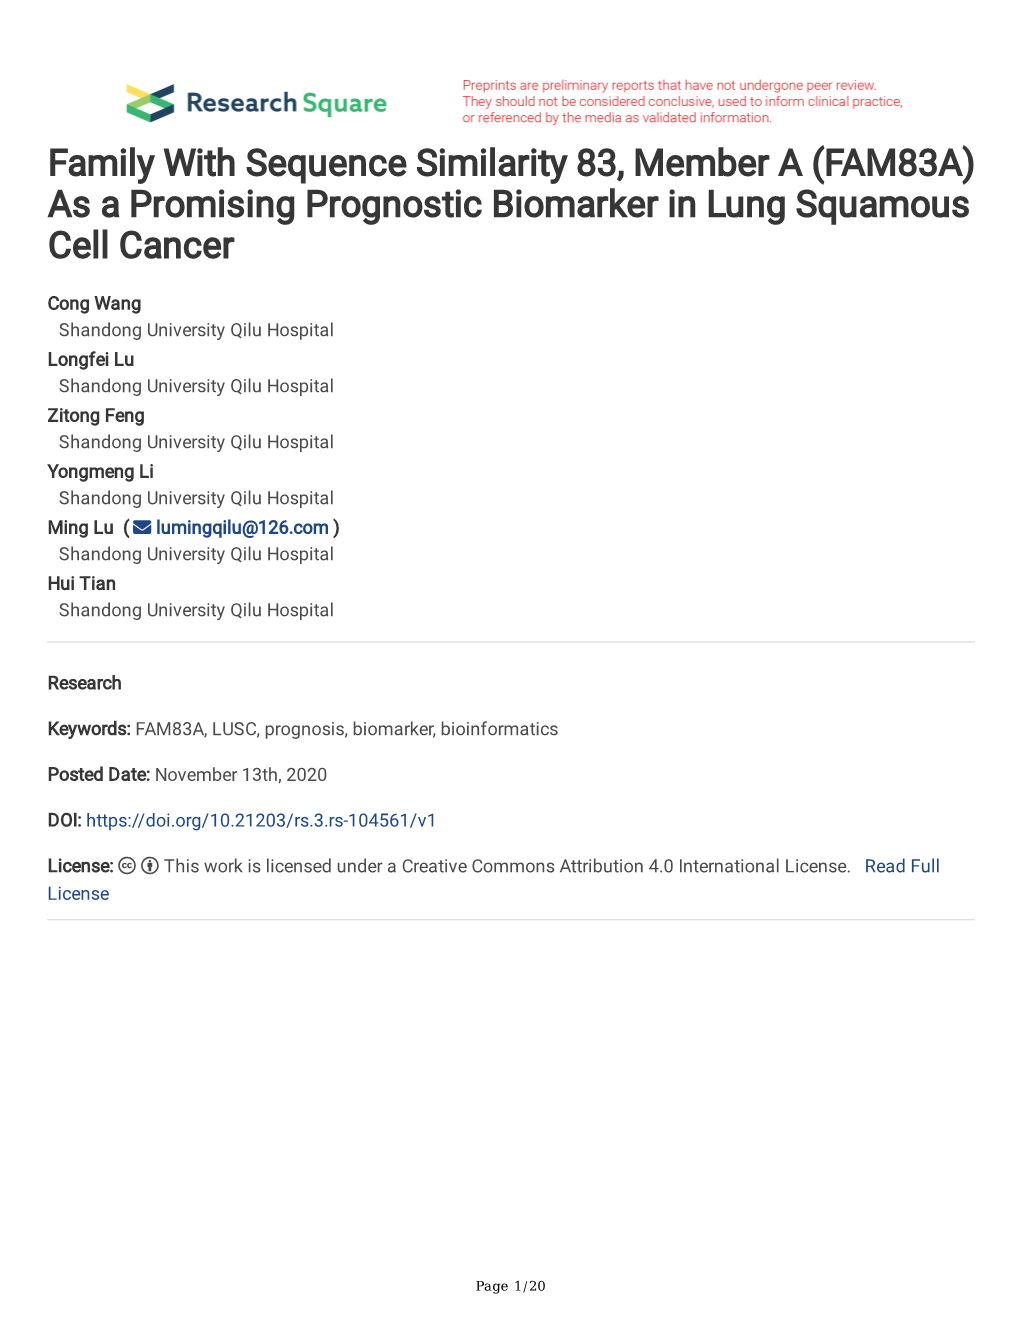 As a Promising Prognostic Biomarker in Lung Squamous Cell Cancer